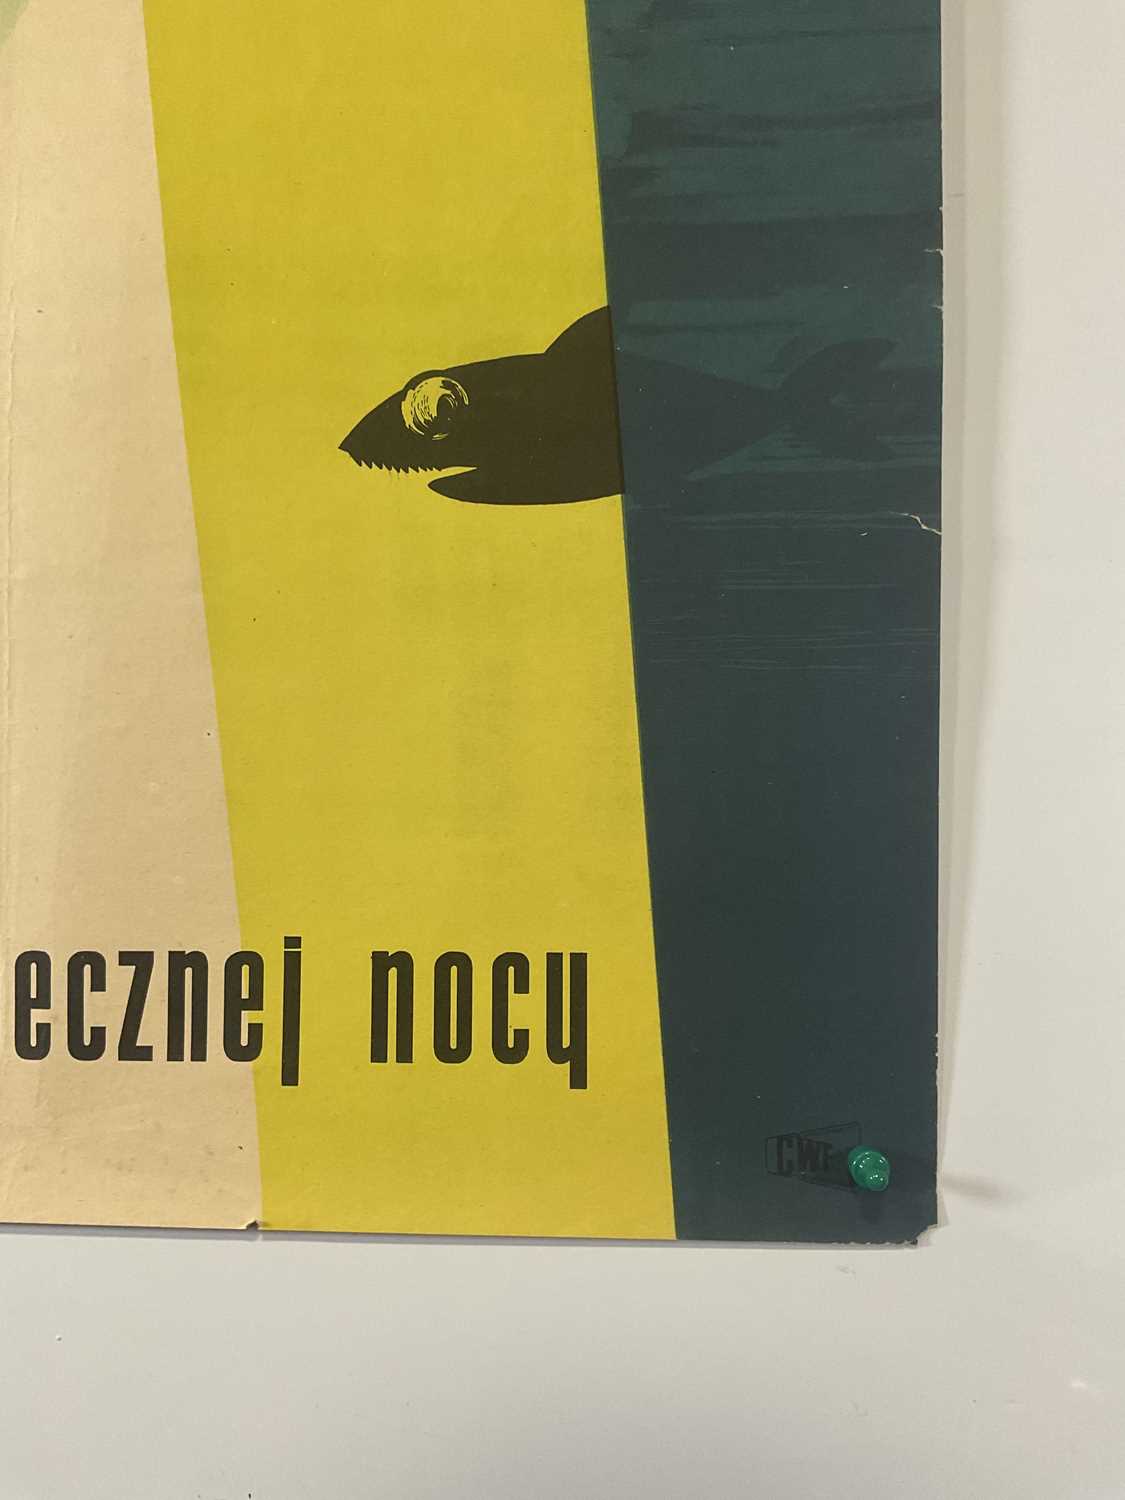 MYSTERY OF THE ETERNAL NIGHT (1956) Polish film poster 23" x 33.5", folded - Image 4 of 6